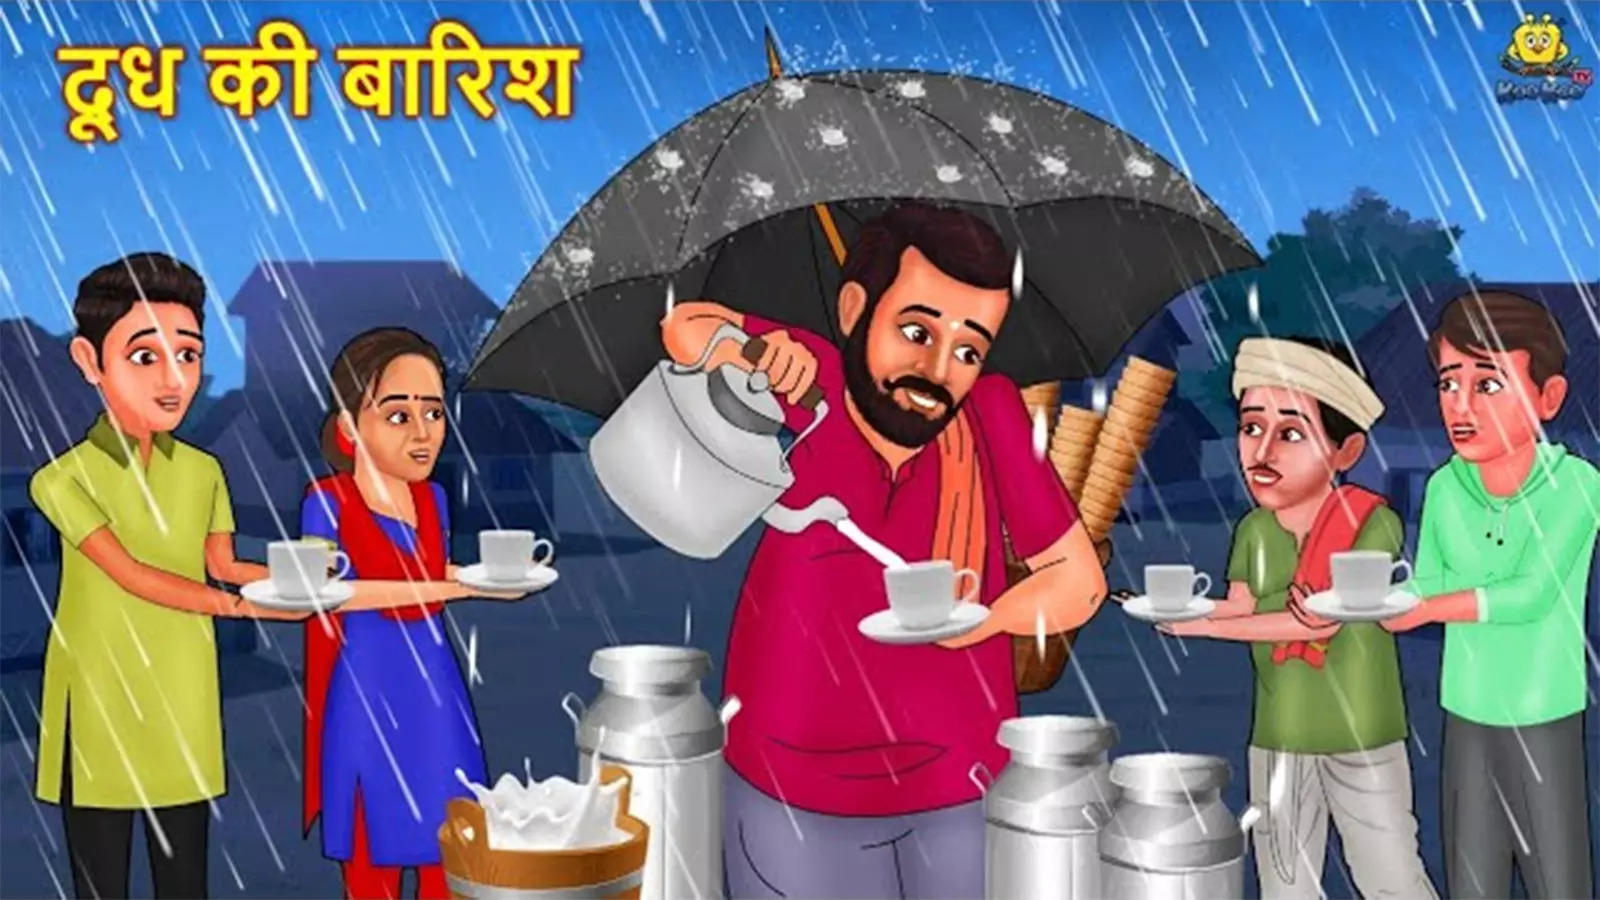 Watch Popular Children Hindi Story 'Doodh Ki Barish' For Kids - Check Out  Kids's Nursery Rhymes And Baby Songs In Hindi | Entertainment - Times of  India Videos